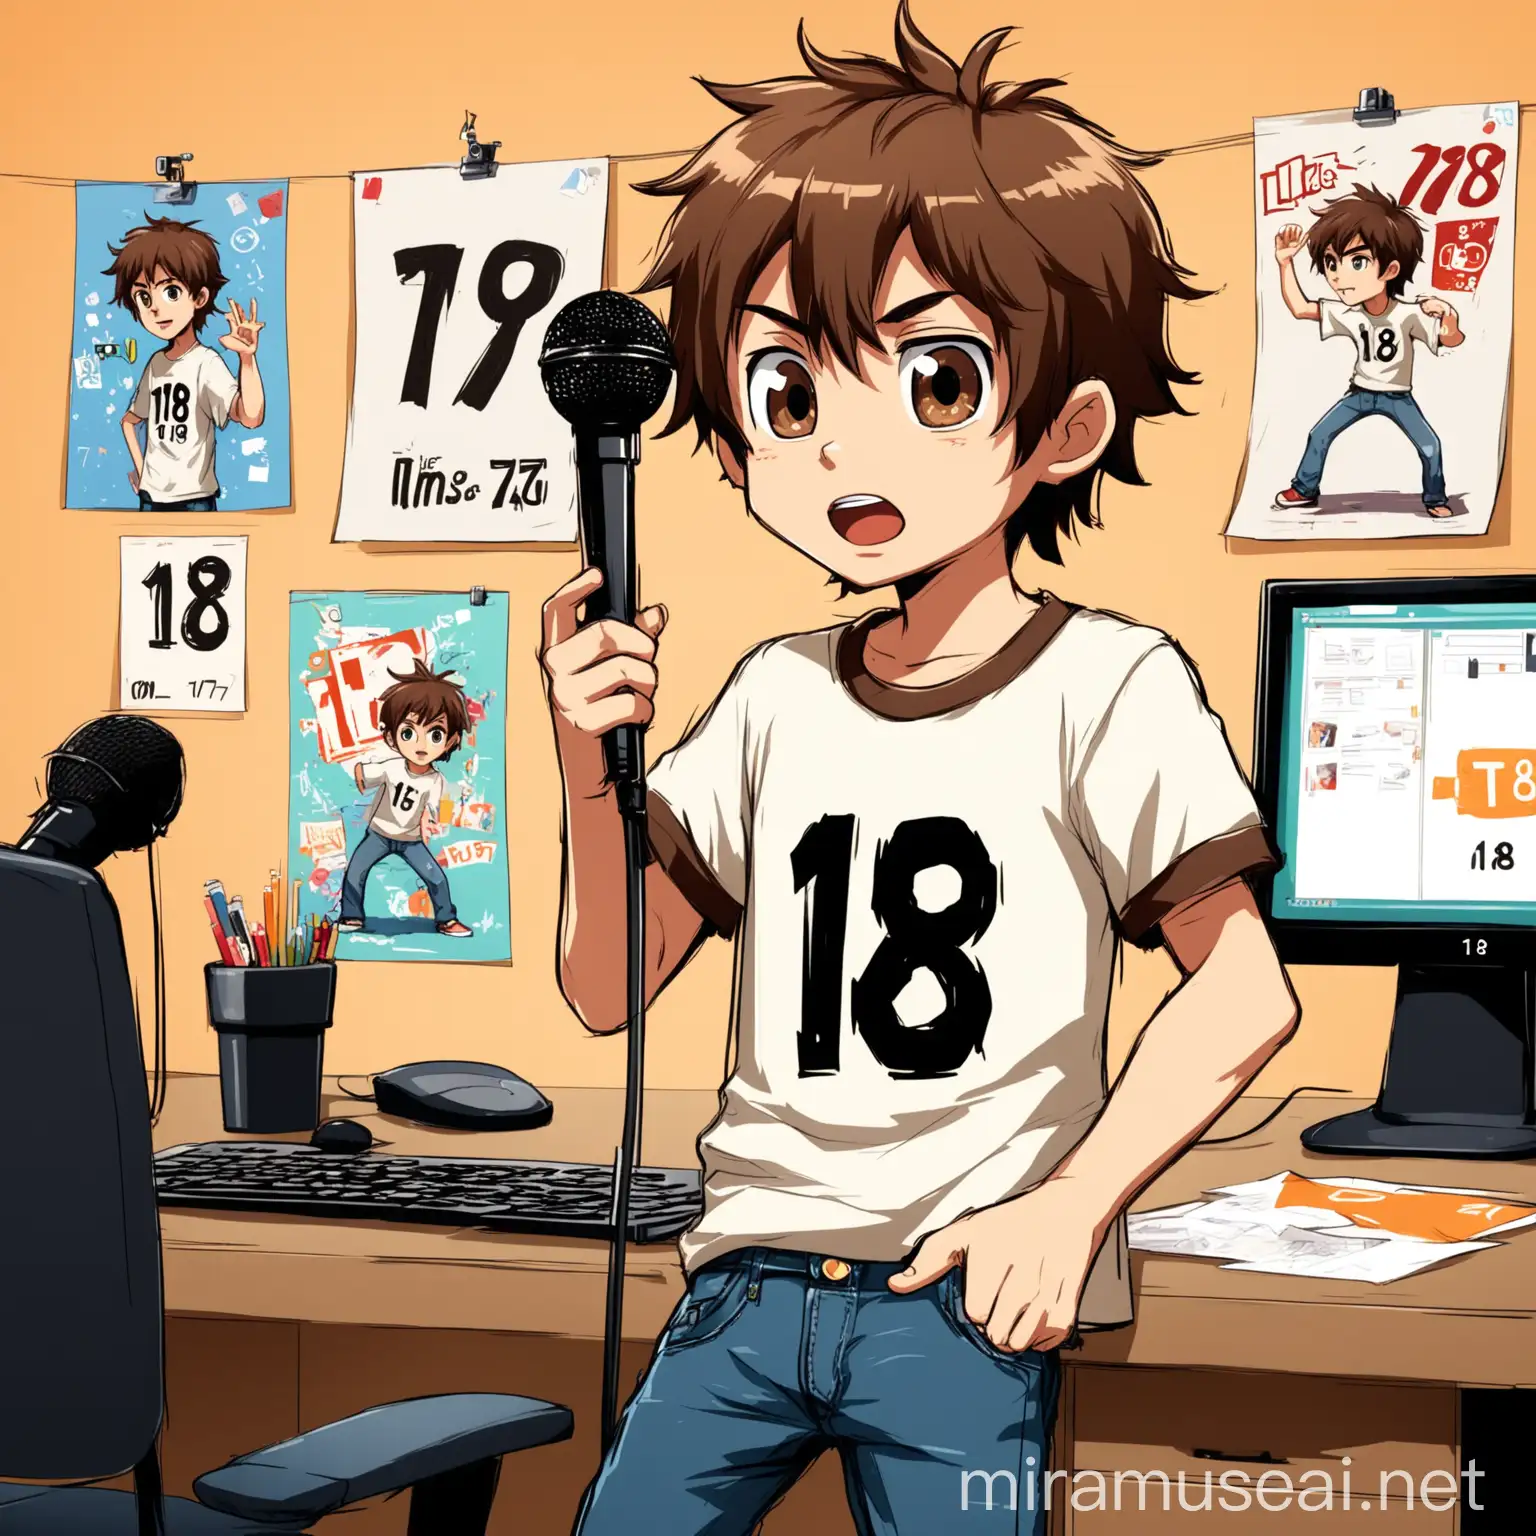 Generate a cartoon-style character of a young boy in his early 17s with medium-length messy brown hair, expressive brown eyes . He is wearing a casual t-shirt with the number '18' prominently displayed and jeans. The character should be in an animated pose, mid-speech with a microphone in one hand. The background should include elements like a desk with a computer and posters, giving a personal and relatable vibe. Use vibrant colors and ensure the character's emotions are clearly conveyed.